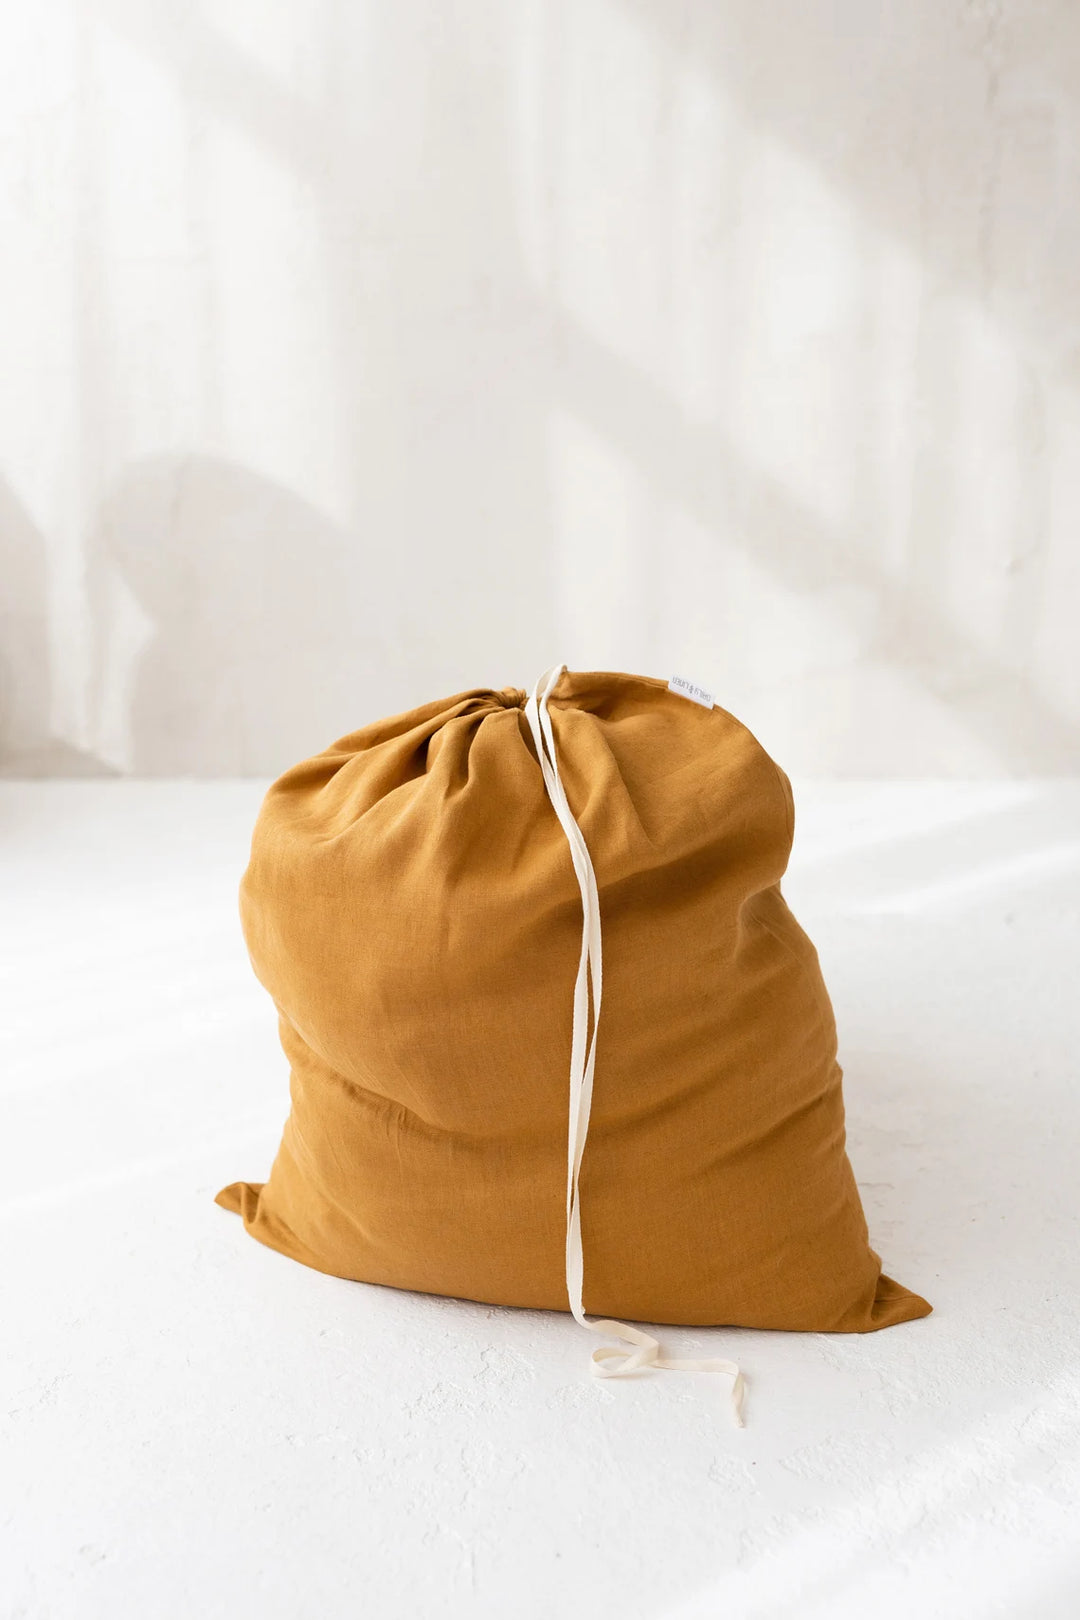 Linen Laundry Bag In Amber Yellow -  Daily Linen